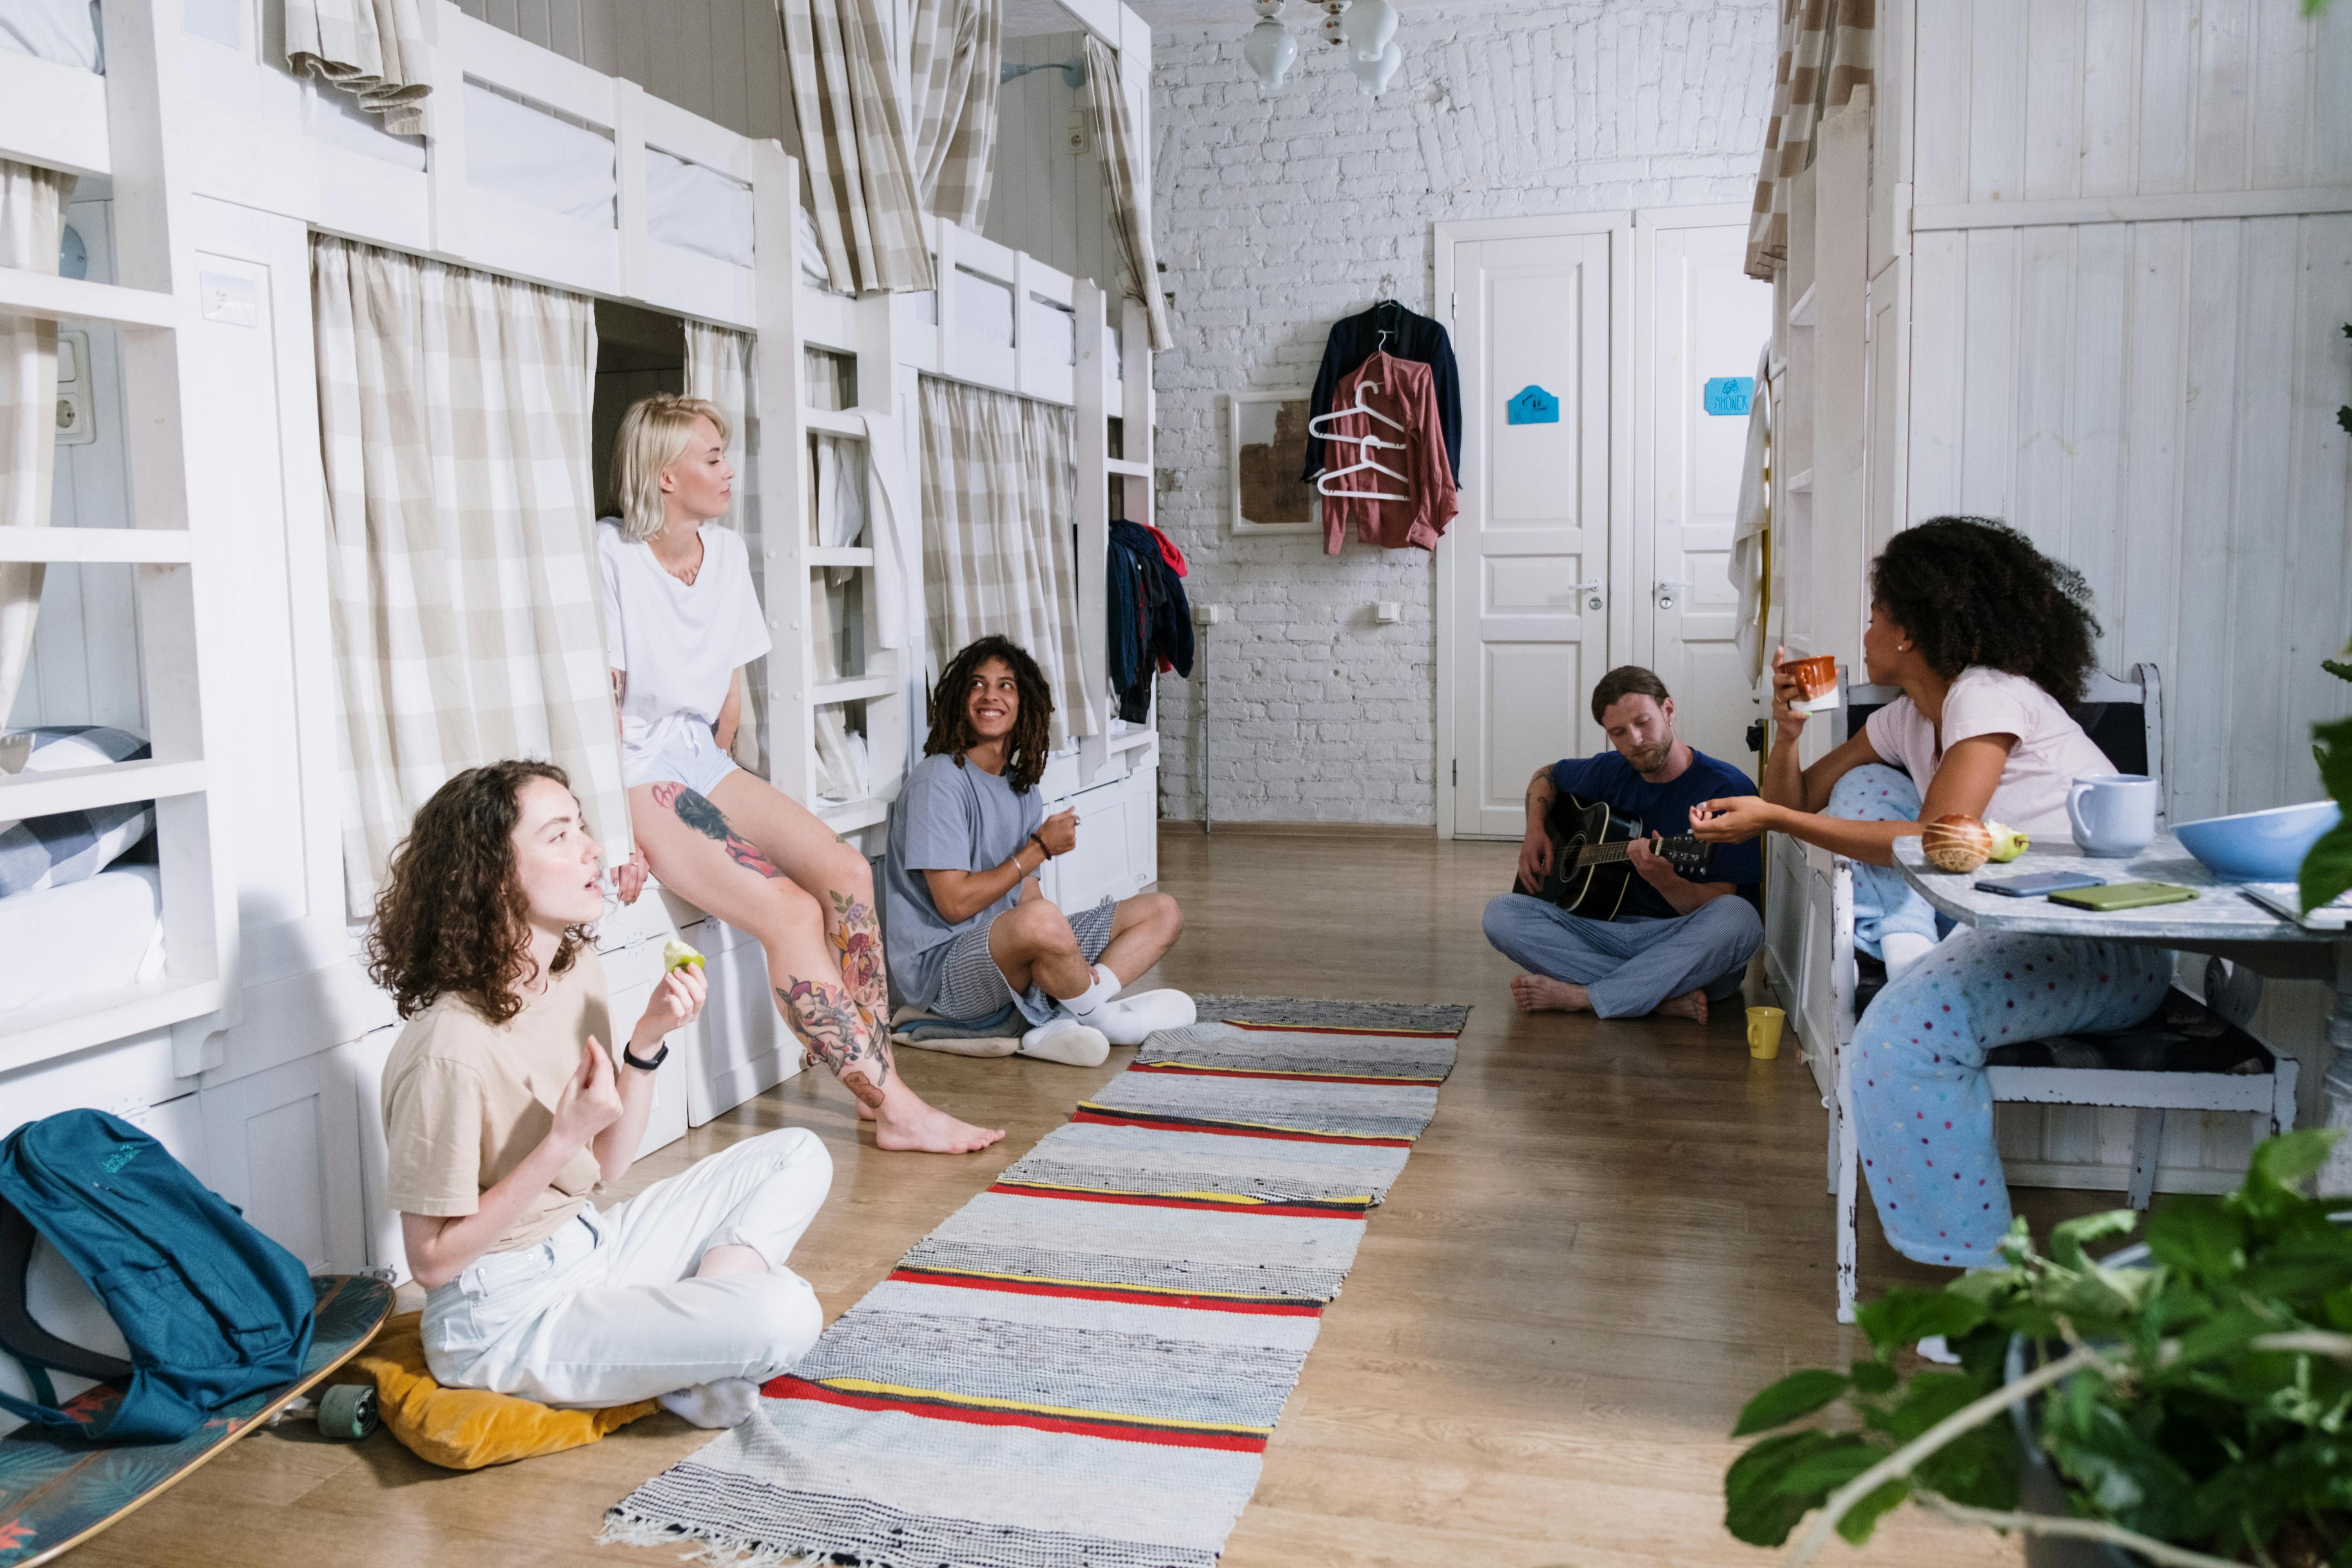 Free Group of Friend Inside a Dormitory Stock Photo